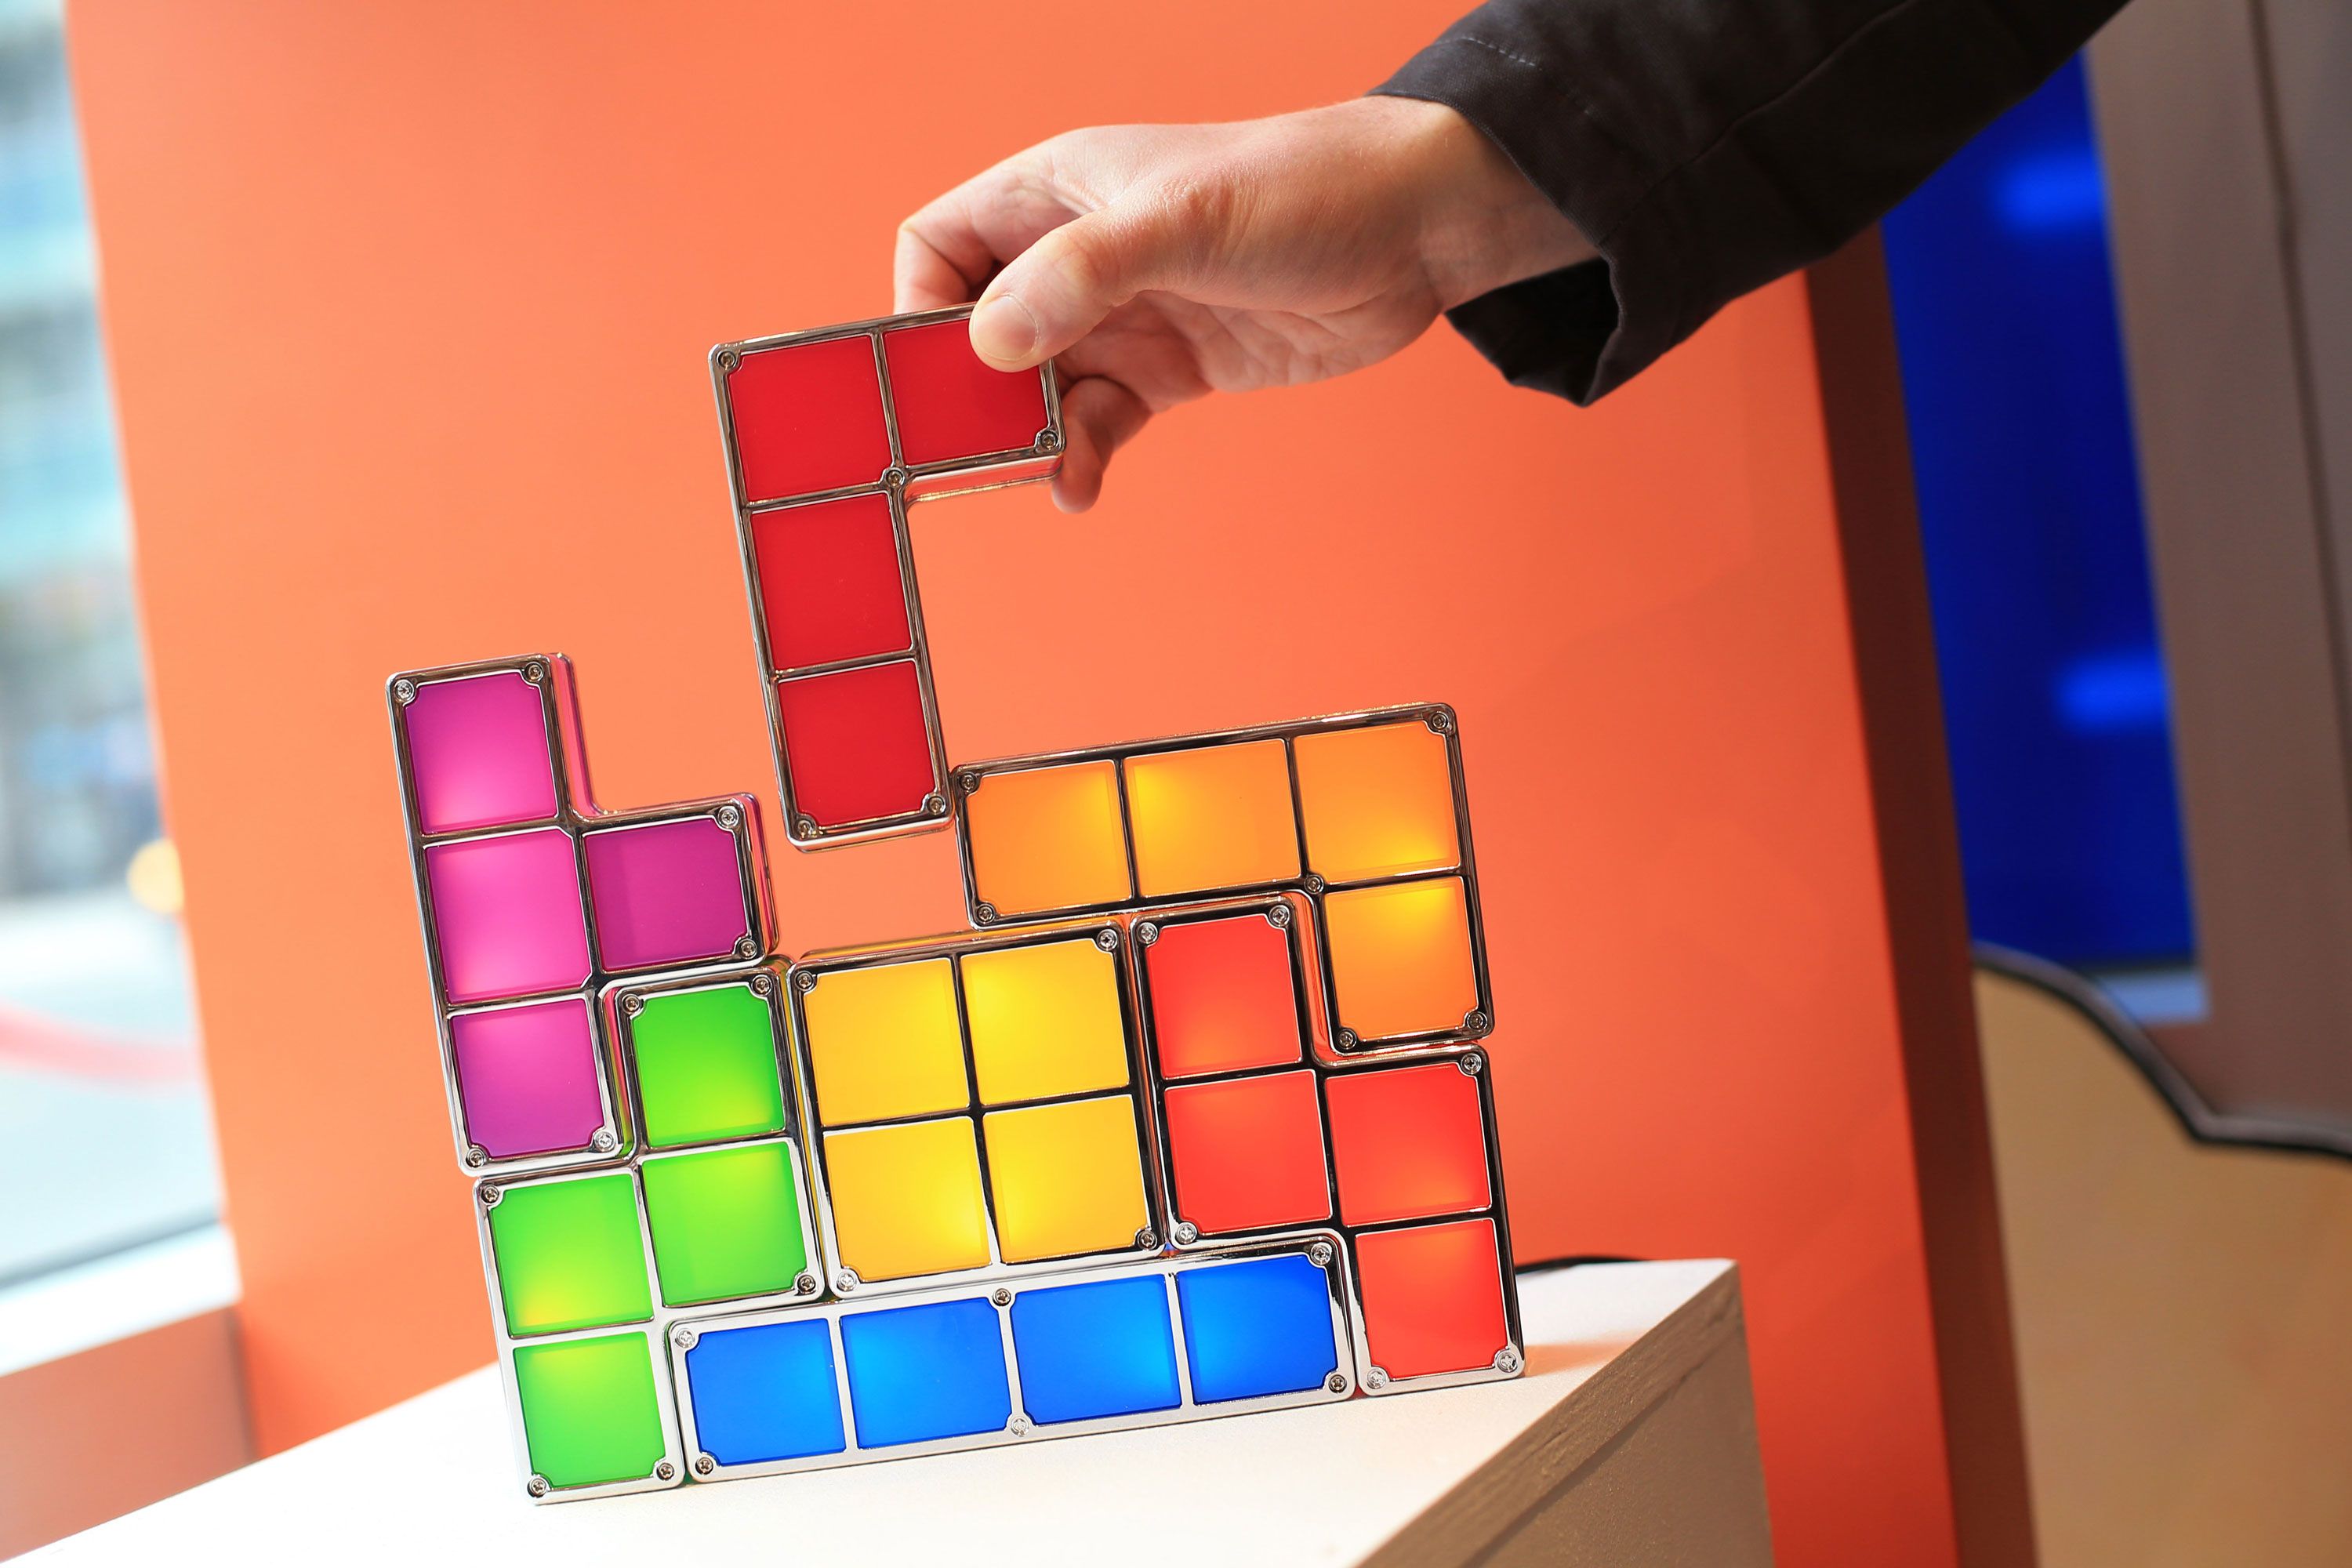 Tetris' Stays True to Real-Life Events Based on Video Game's Origin